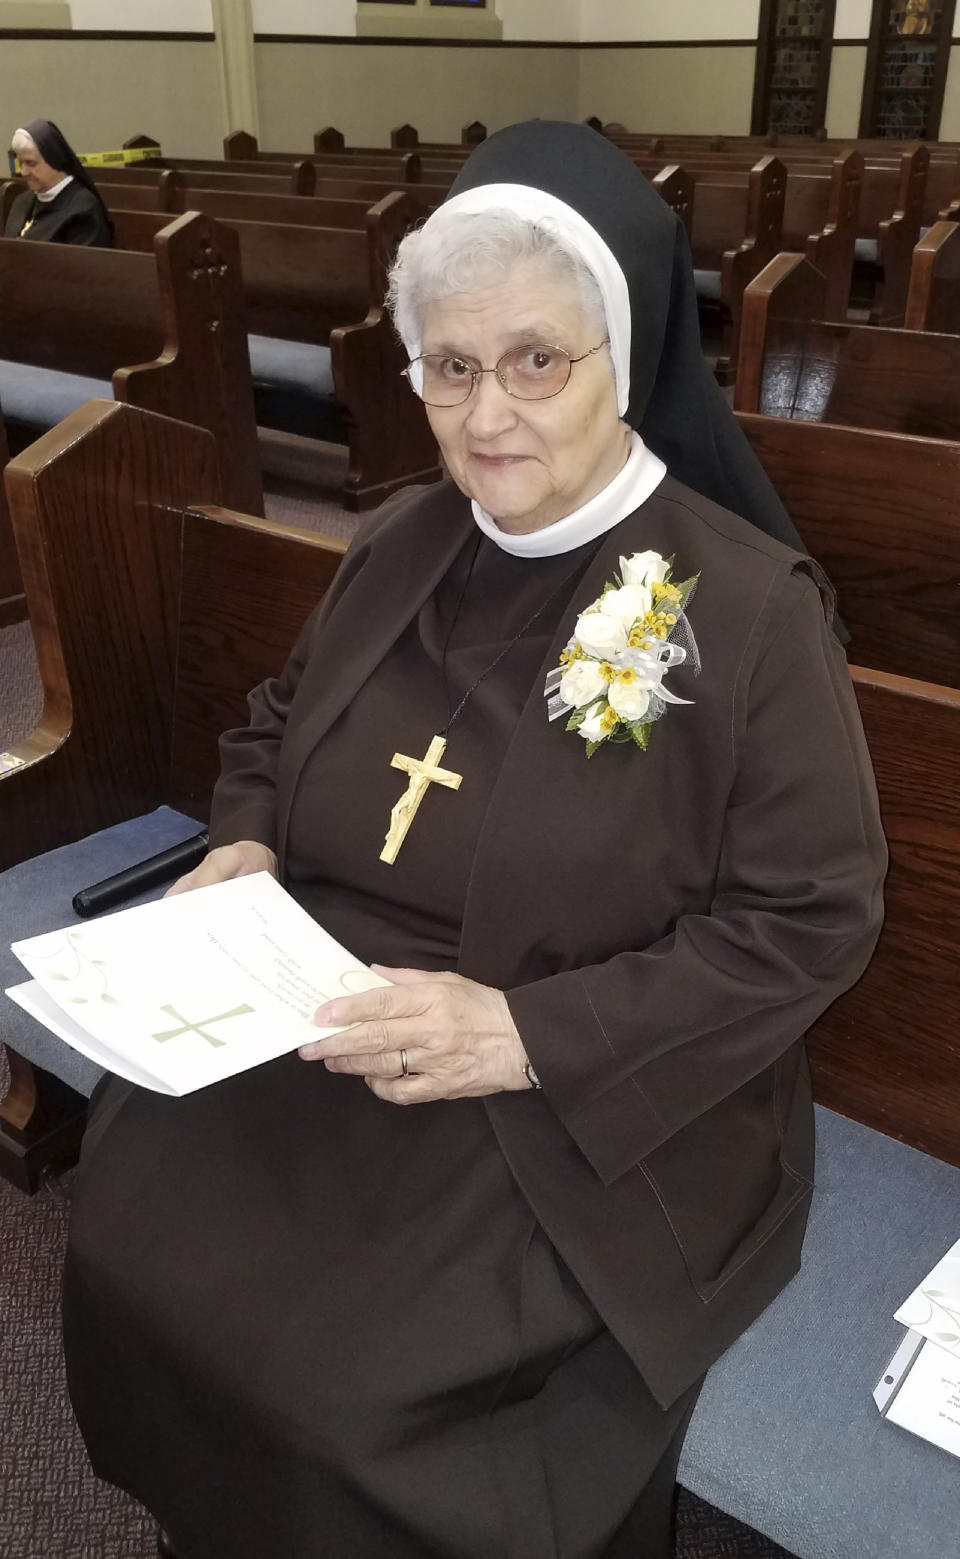 In this photo provided by Sister Mary Jeanine Morozowich, Sister Mary Evelyn Labik is recognized for her 60 years with the Felician Sisters of North America, in Greensburg, Pa., on Oct. 4, 2020. Labik contracted the coronavirus soon after and died. (Sister Mary Jeanine Morozowich via AP)